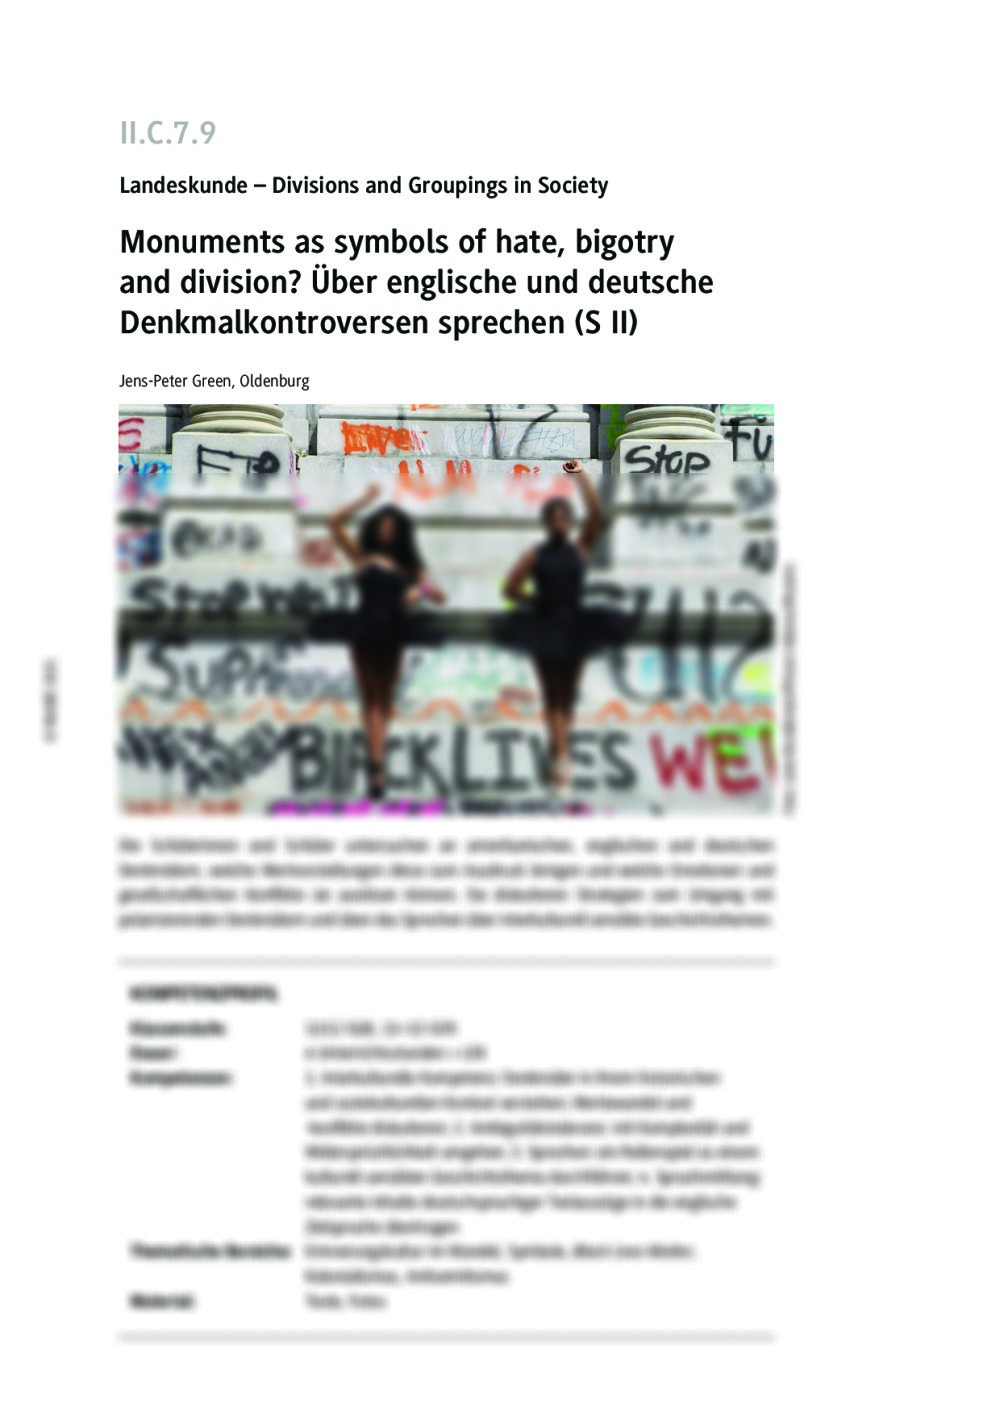 Monuments as symbols of hate, bigotry and division? - Seite 1